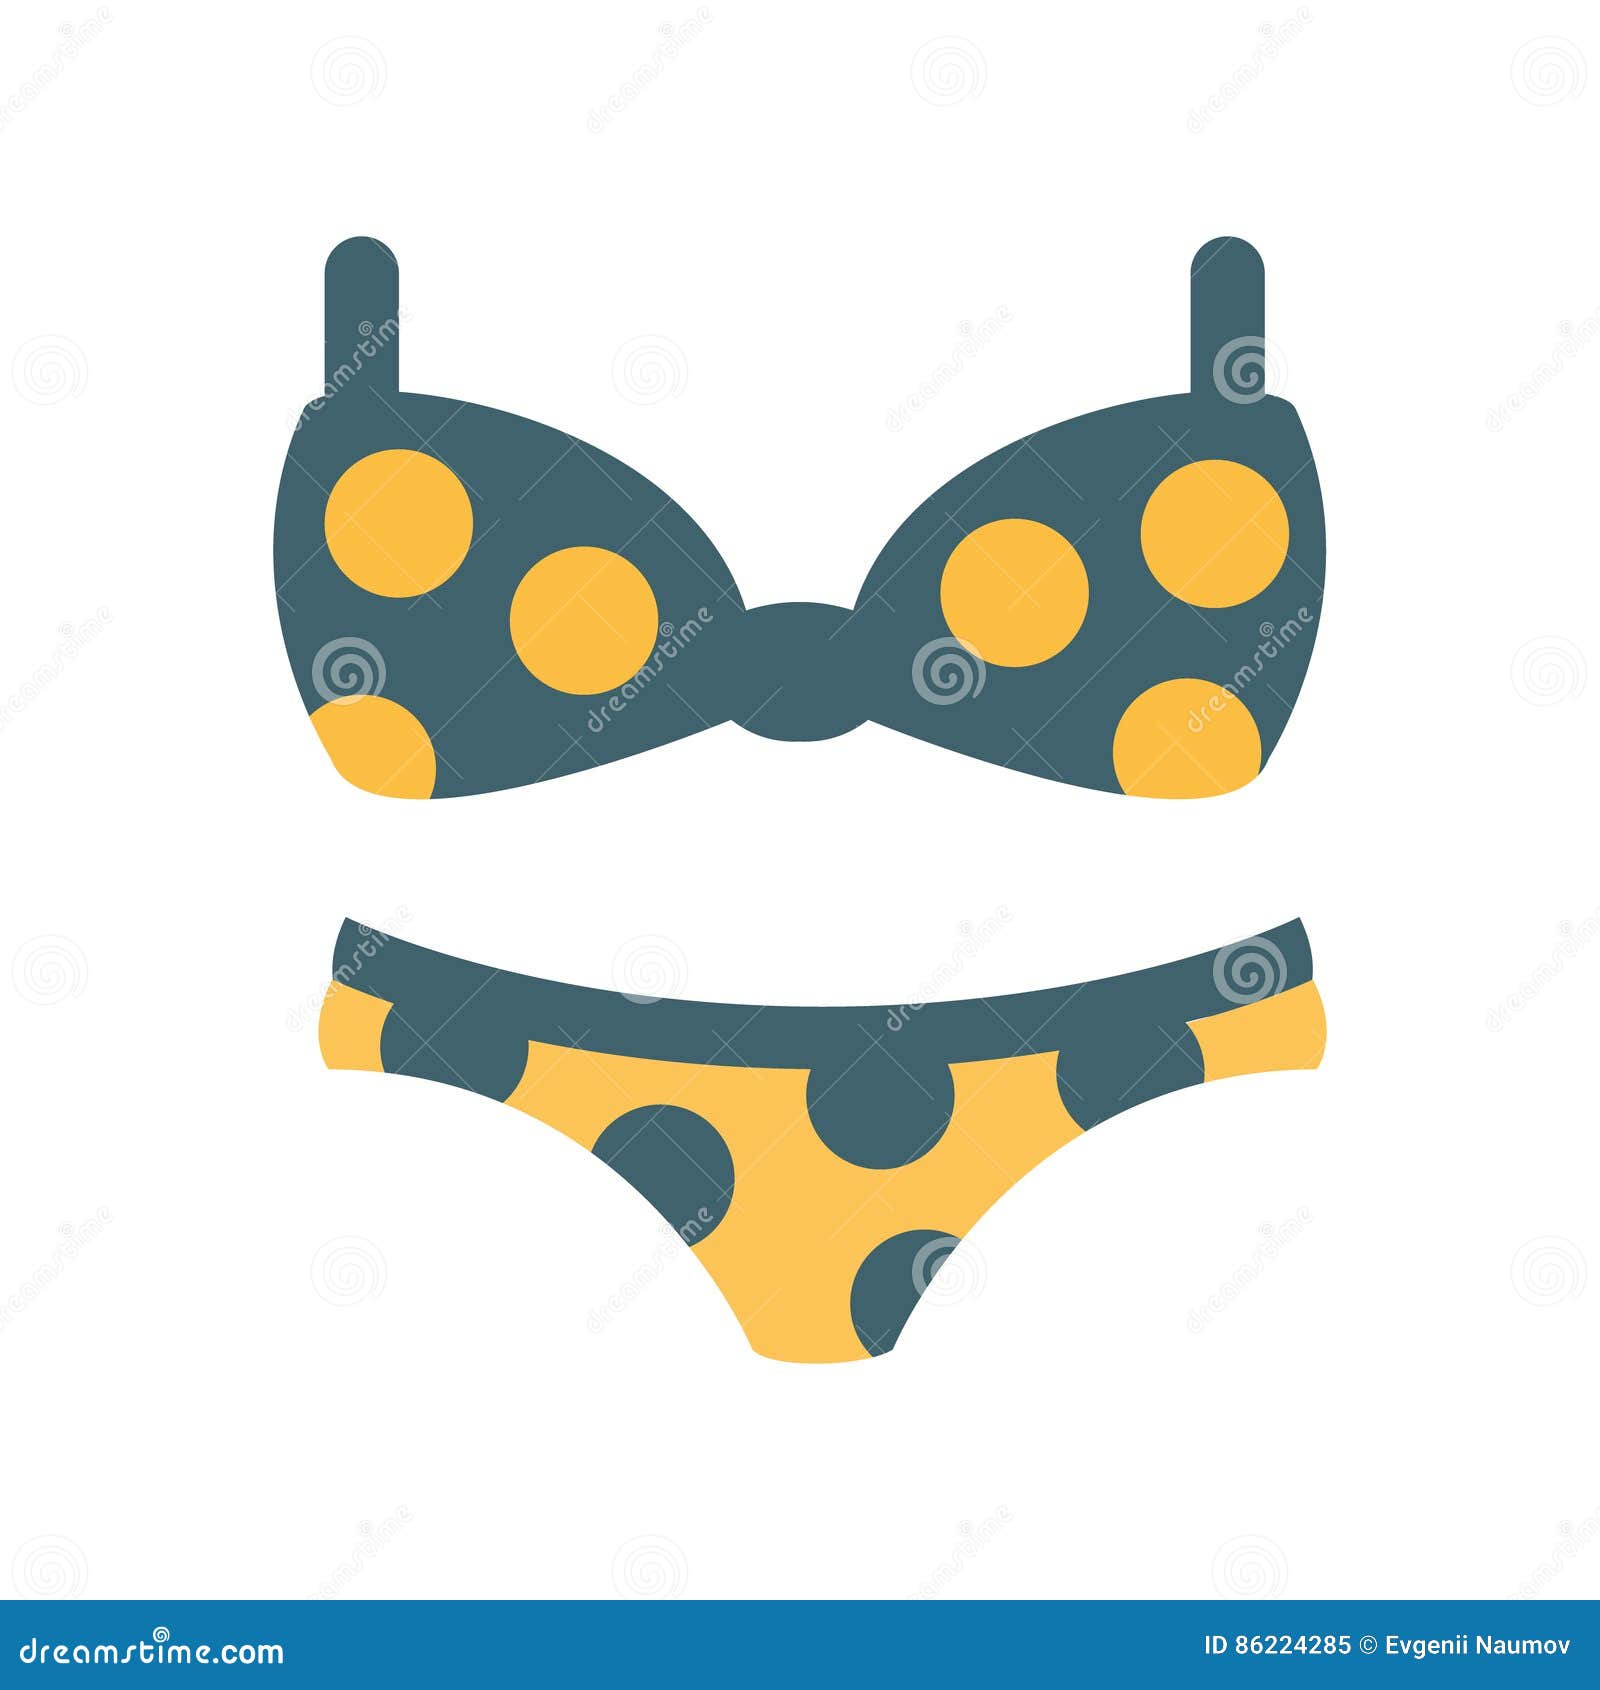 Bikini Female Swimsuit In Blue And Yellow With Polka Dotted Pattern Part Of Summer Beach